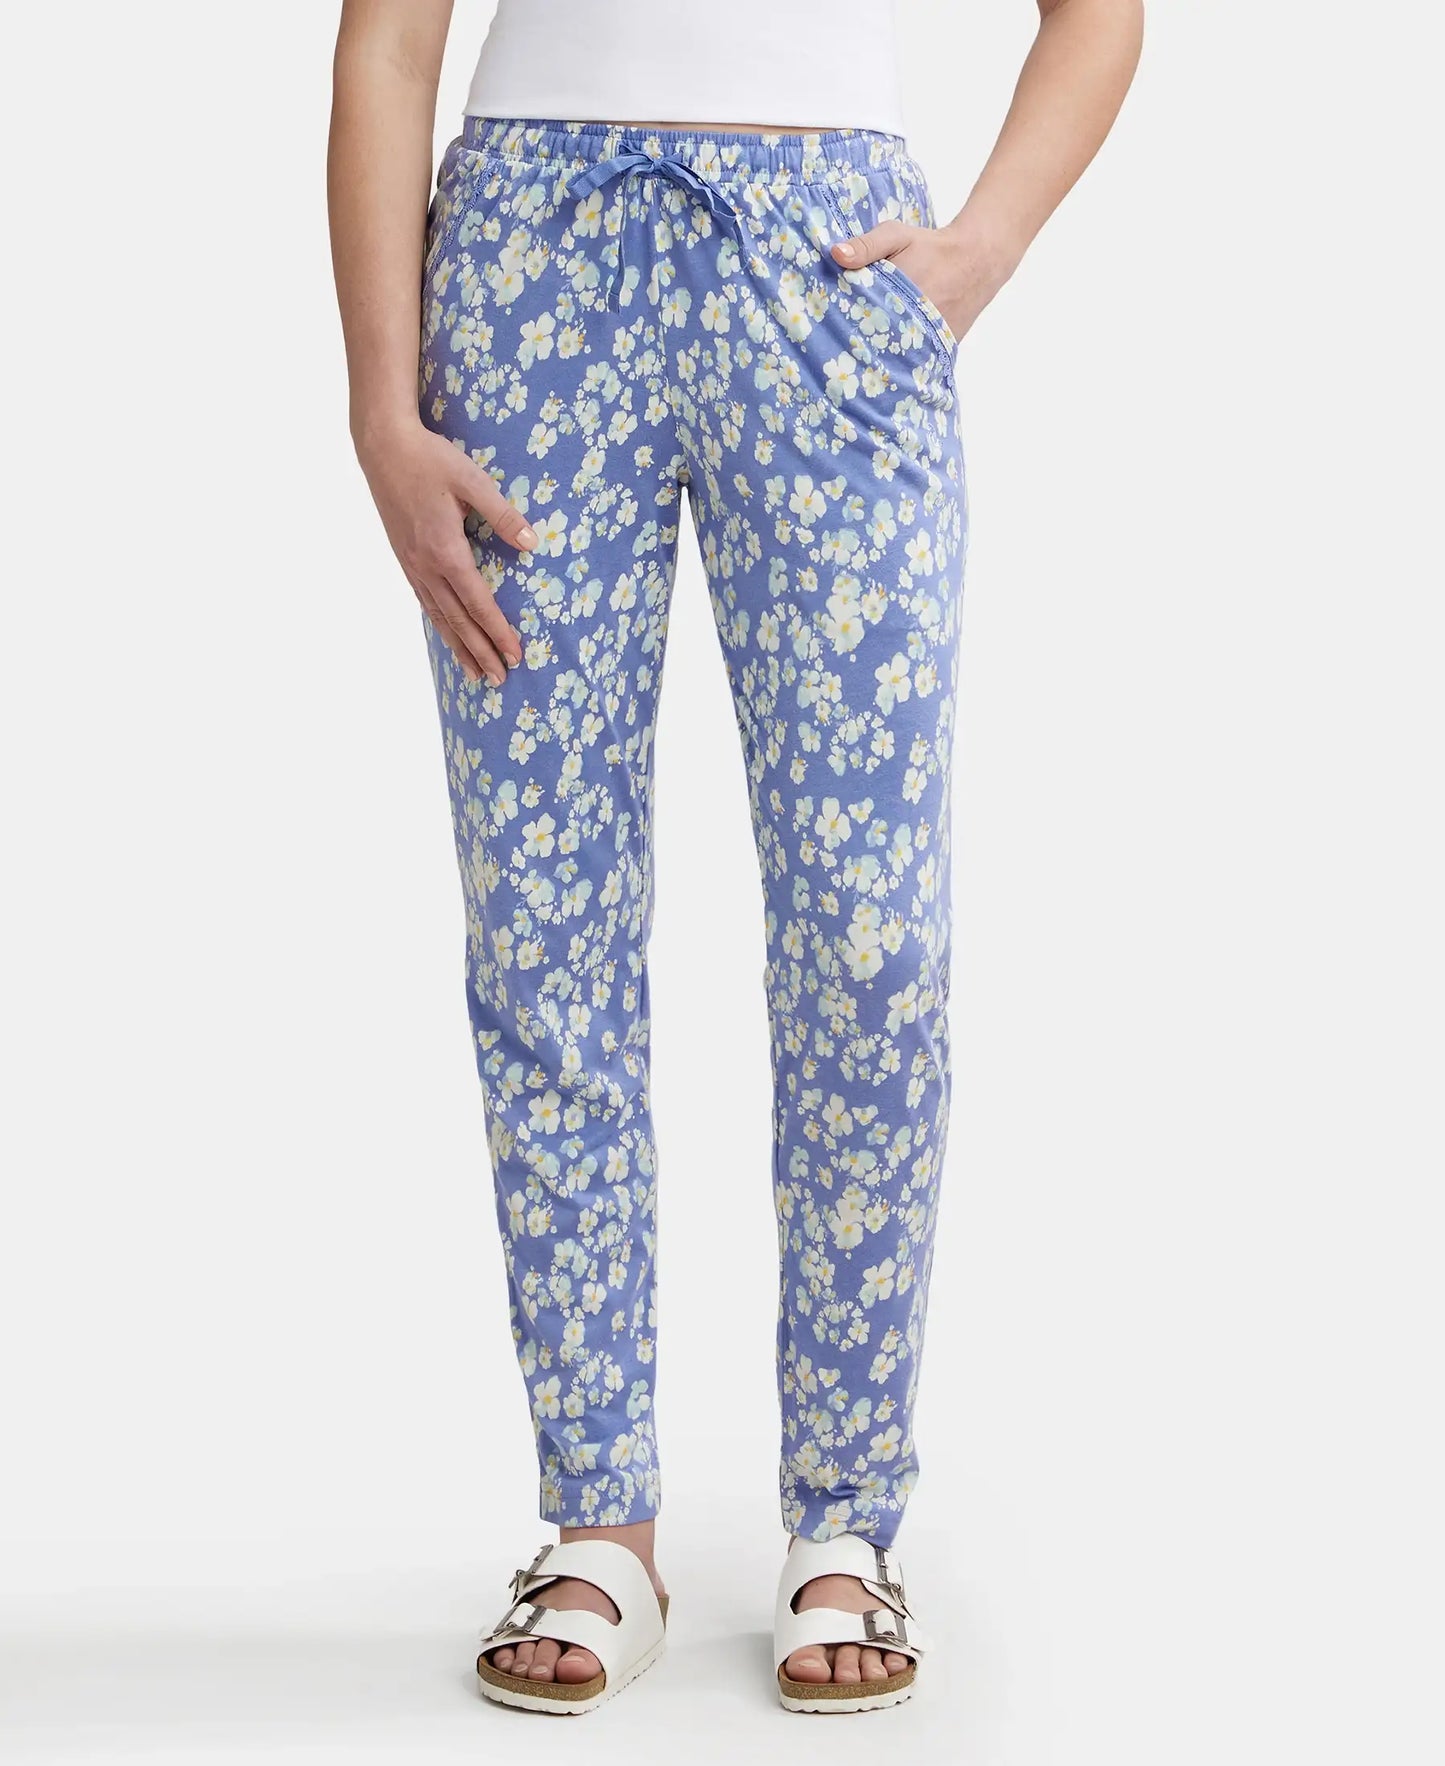 Micro Modal Cotton Relaxed Fit Printed Pyjama with Side Pockets - Iris Blue Assorted Prints-1